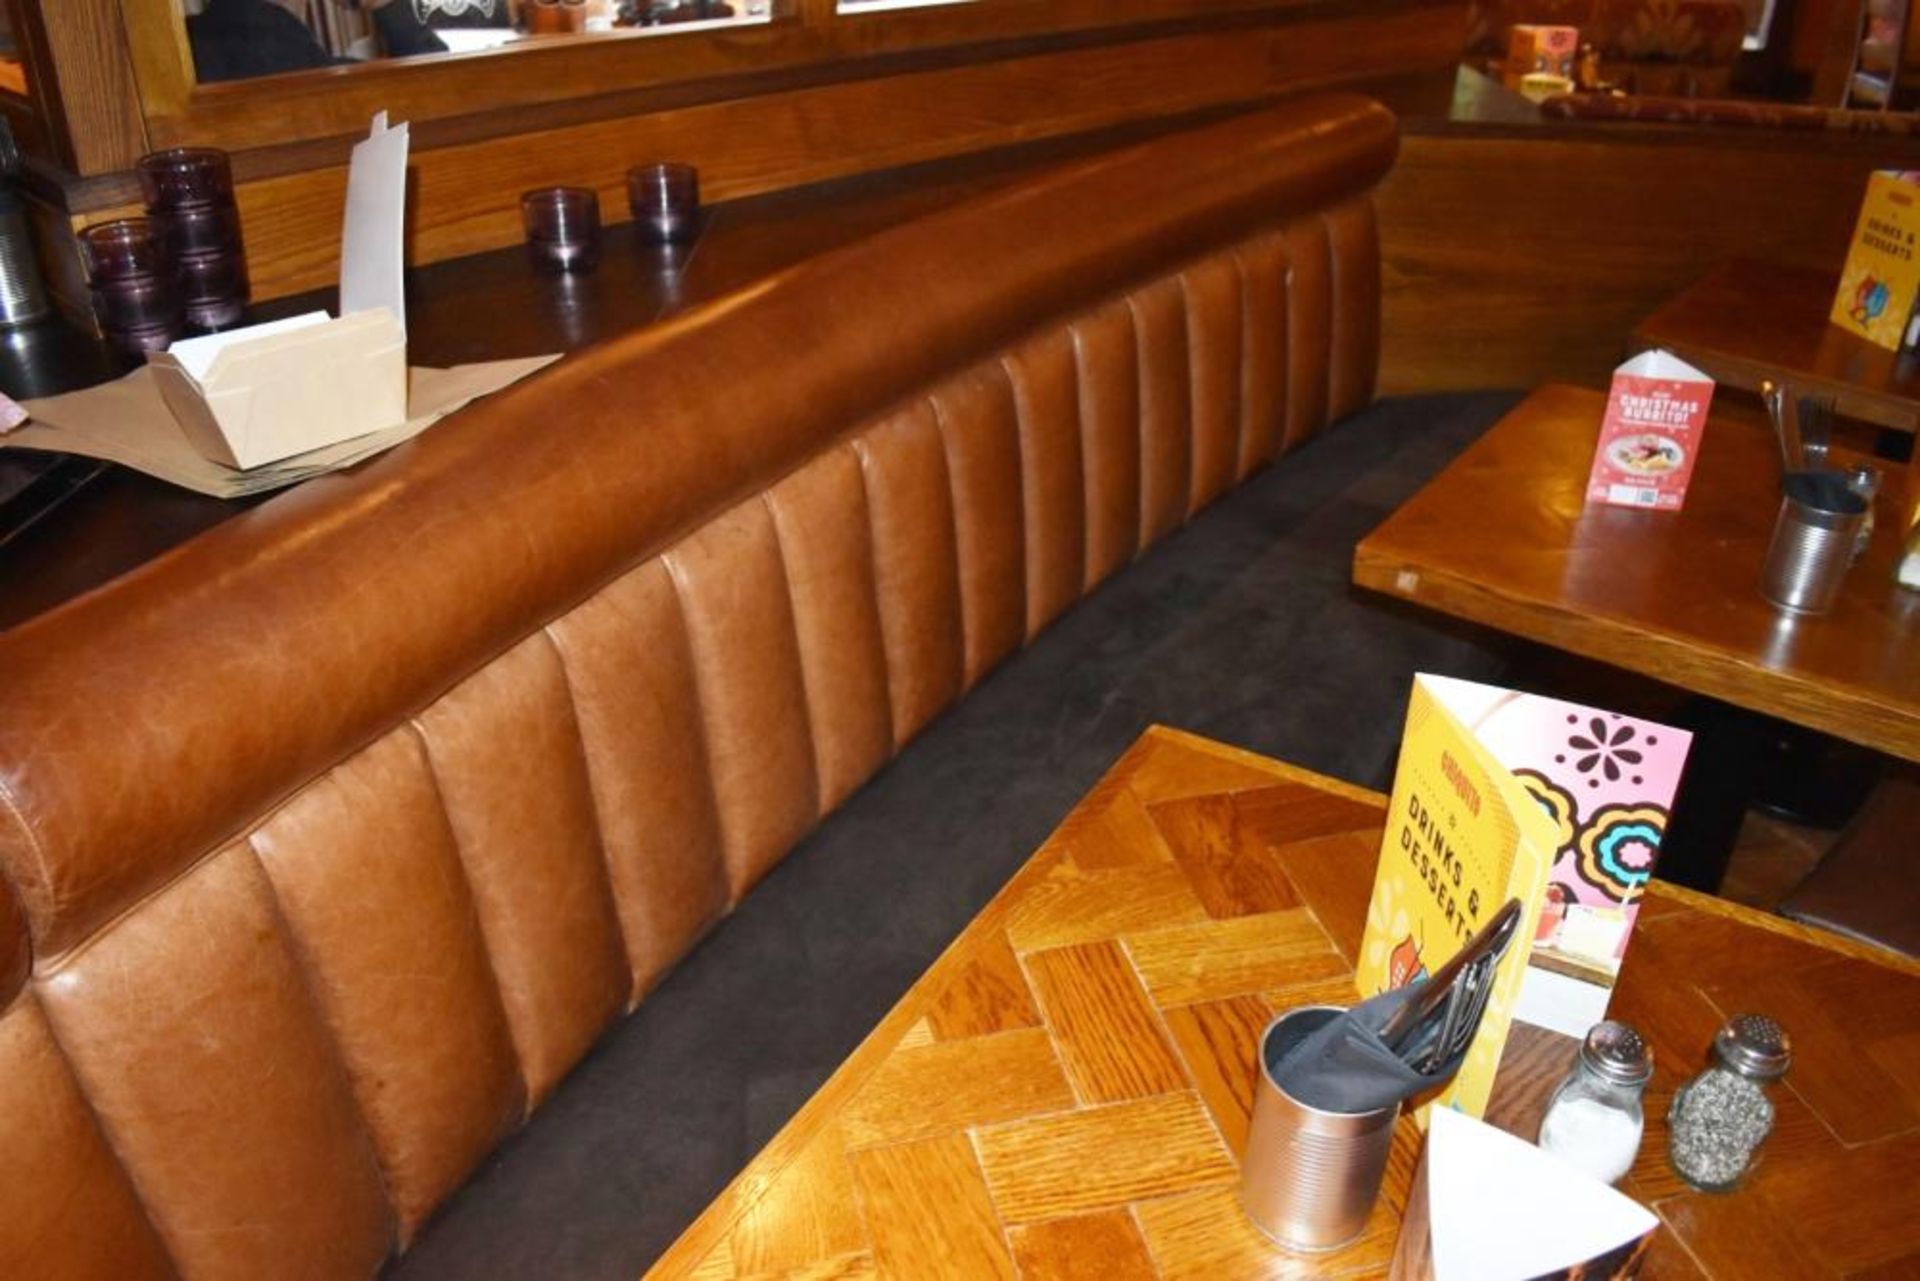 1 x Long Curved Seating Bench From Mexican Themed Restaurant - CL461 - Ref PR891 - Location: London - Image 8 of 14